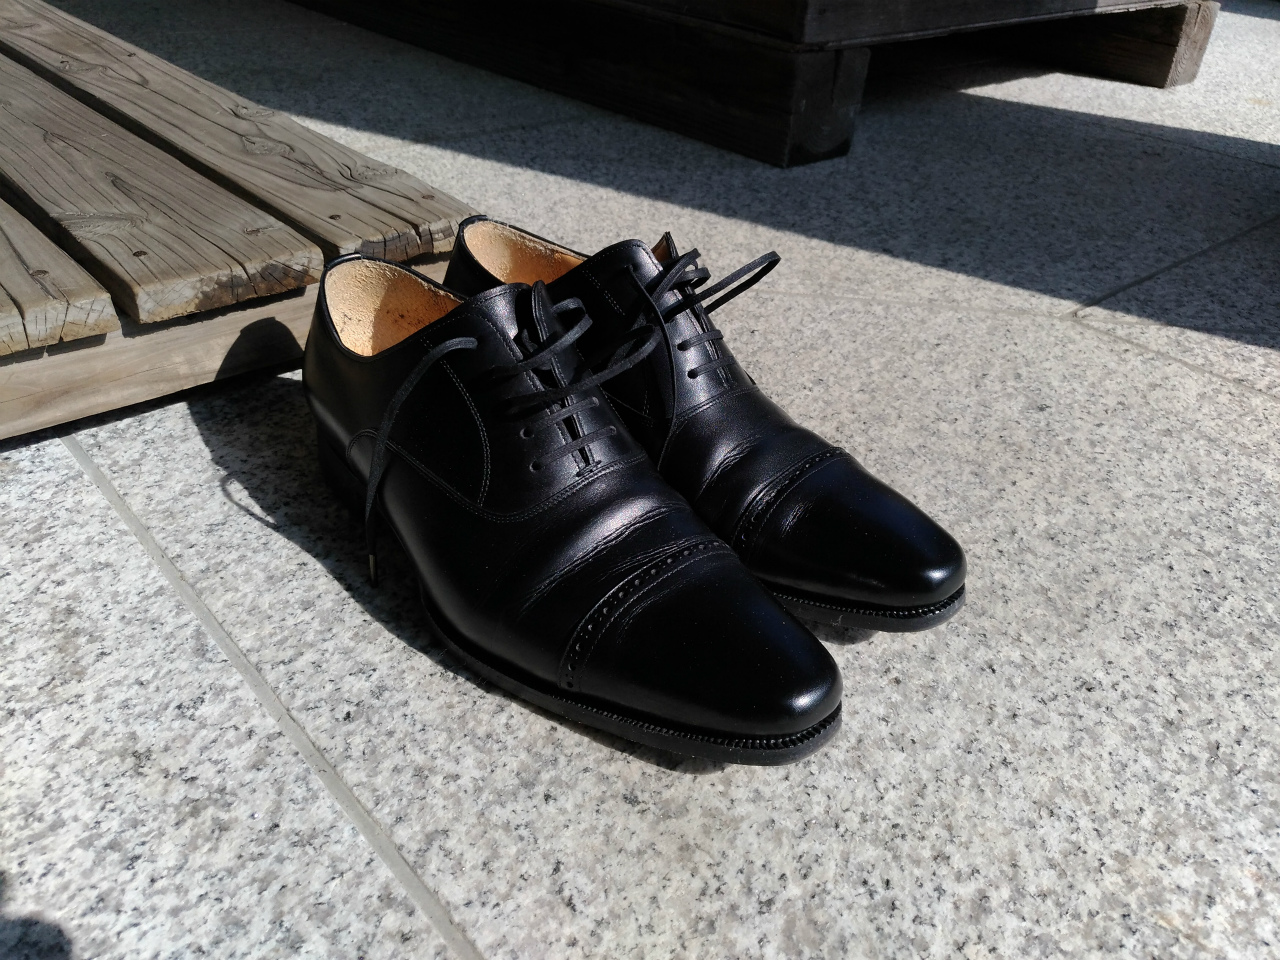 chiba-handsewn-welted-shoes-01